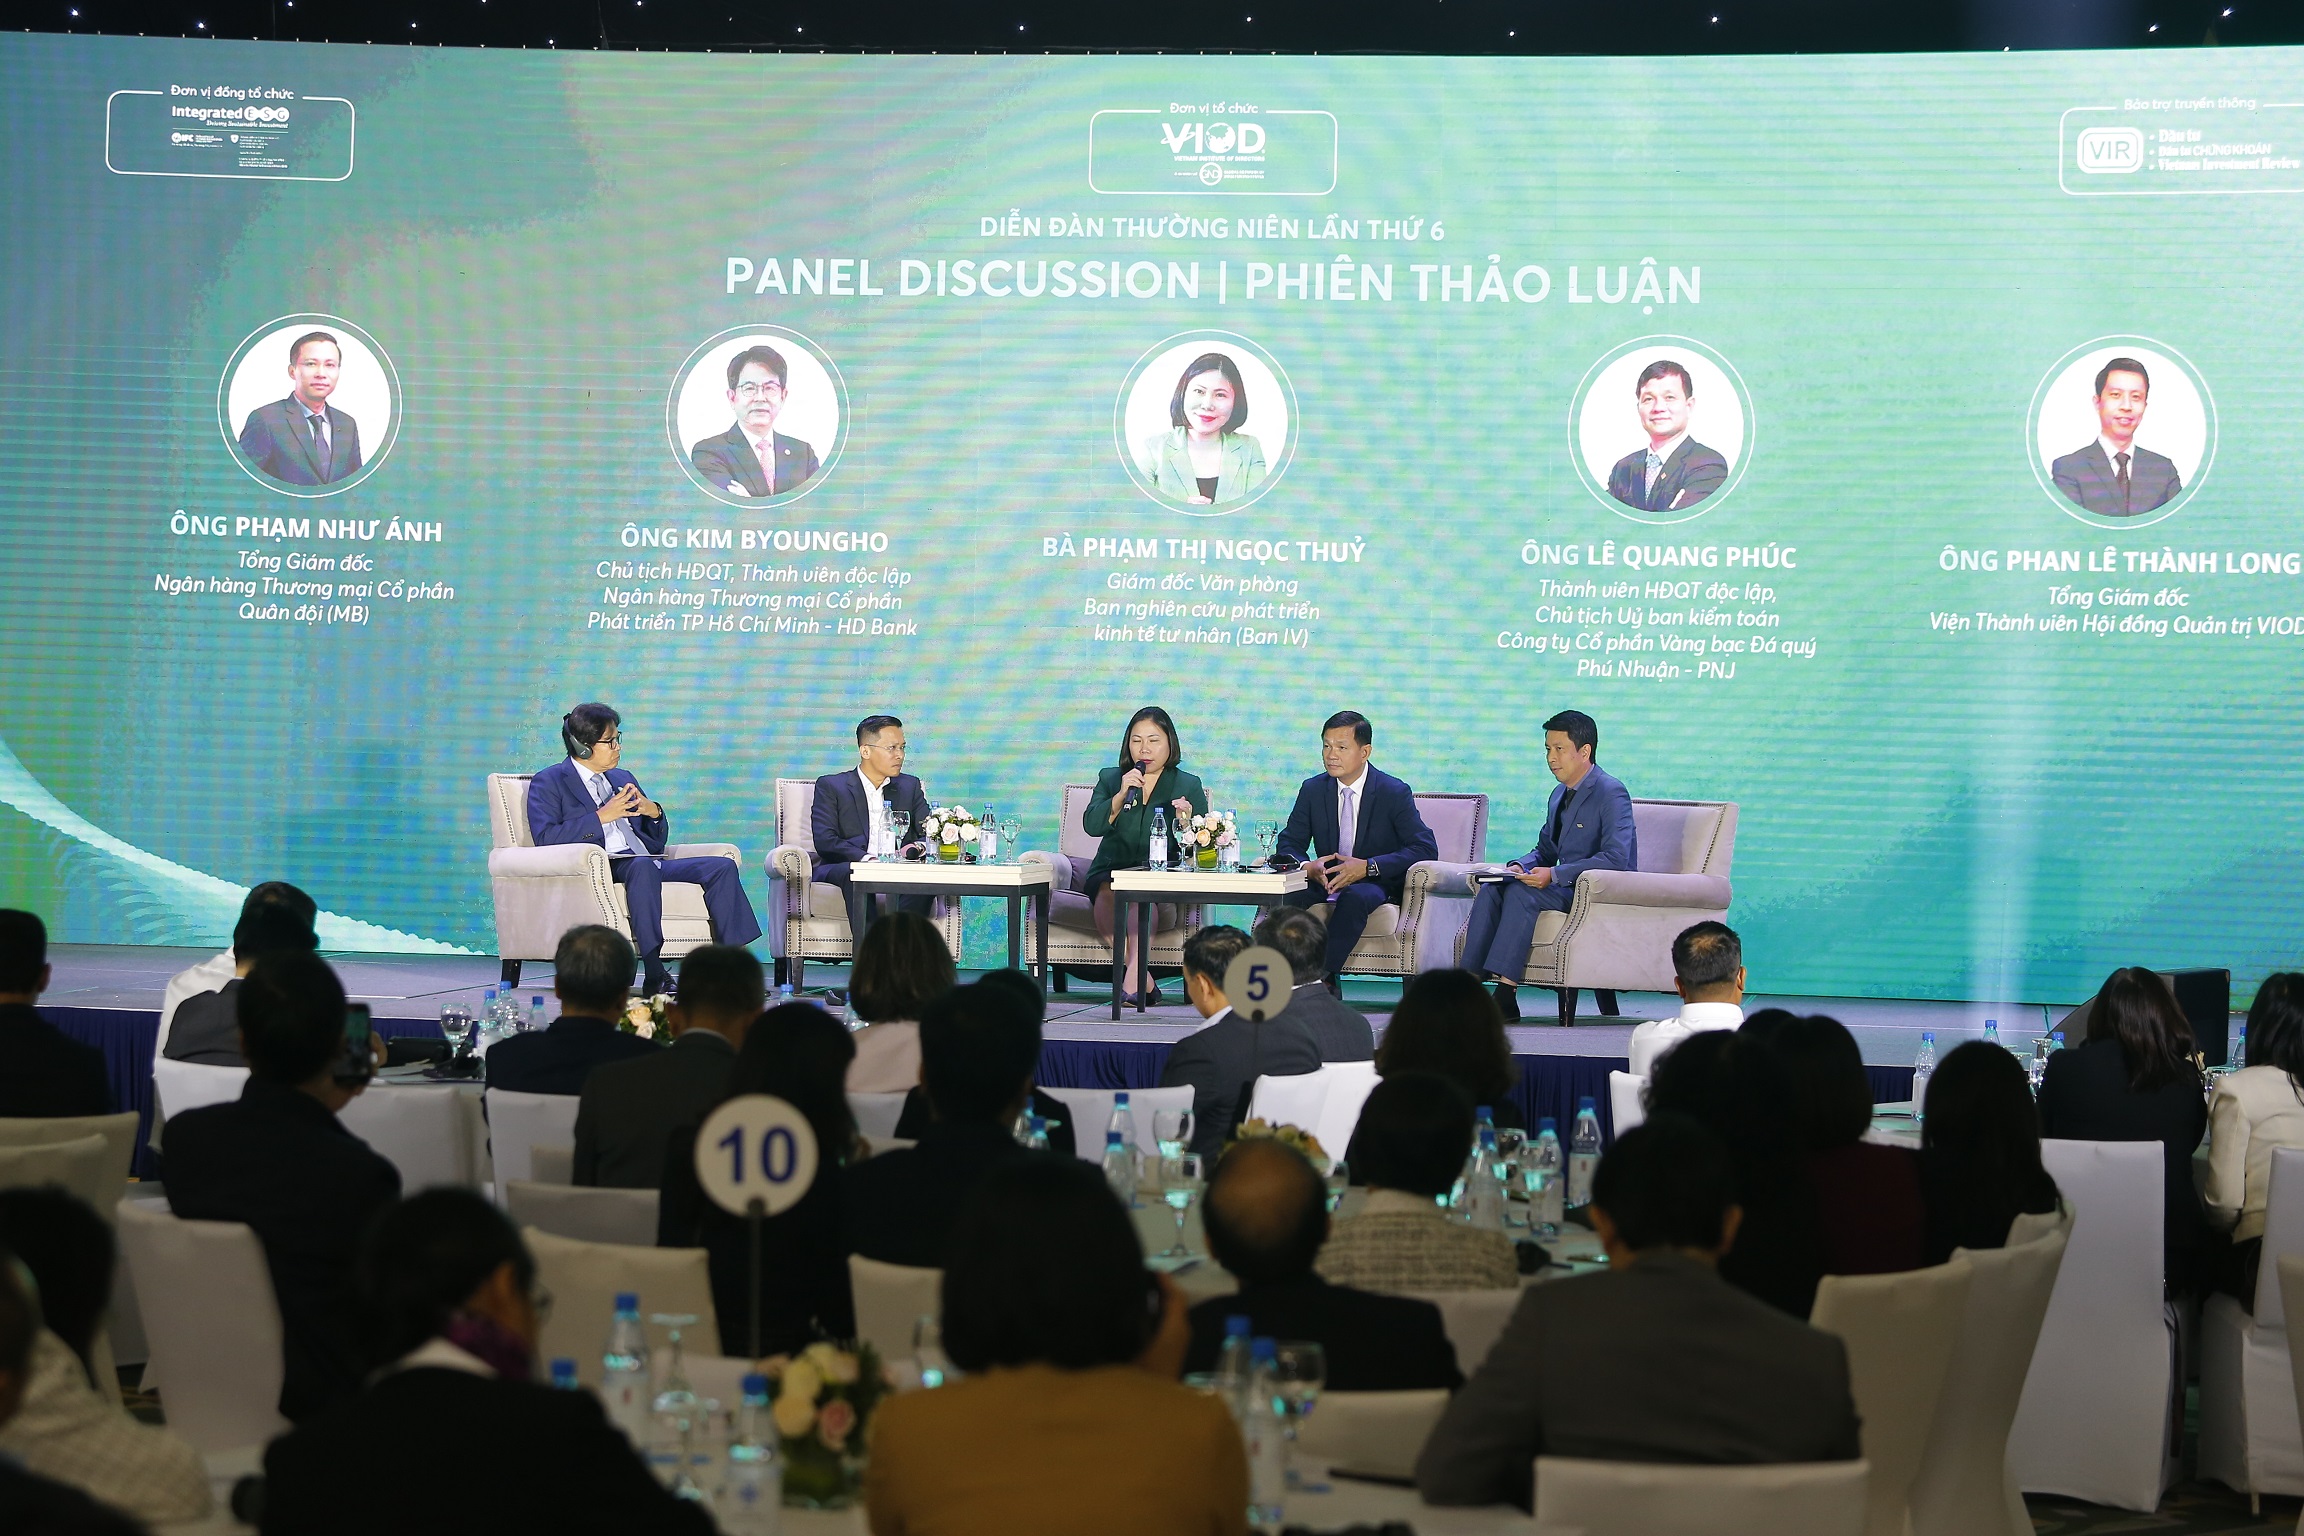 Kim Byoungho, chairman of HDBank, speaks at a panel discussion on “Unlocking Green Finance and Investment through Green Governance” as part of the Annual Forum on Corporate Governance in Hà Nội on November 22.